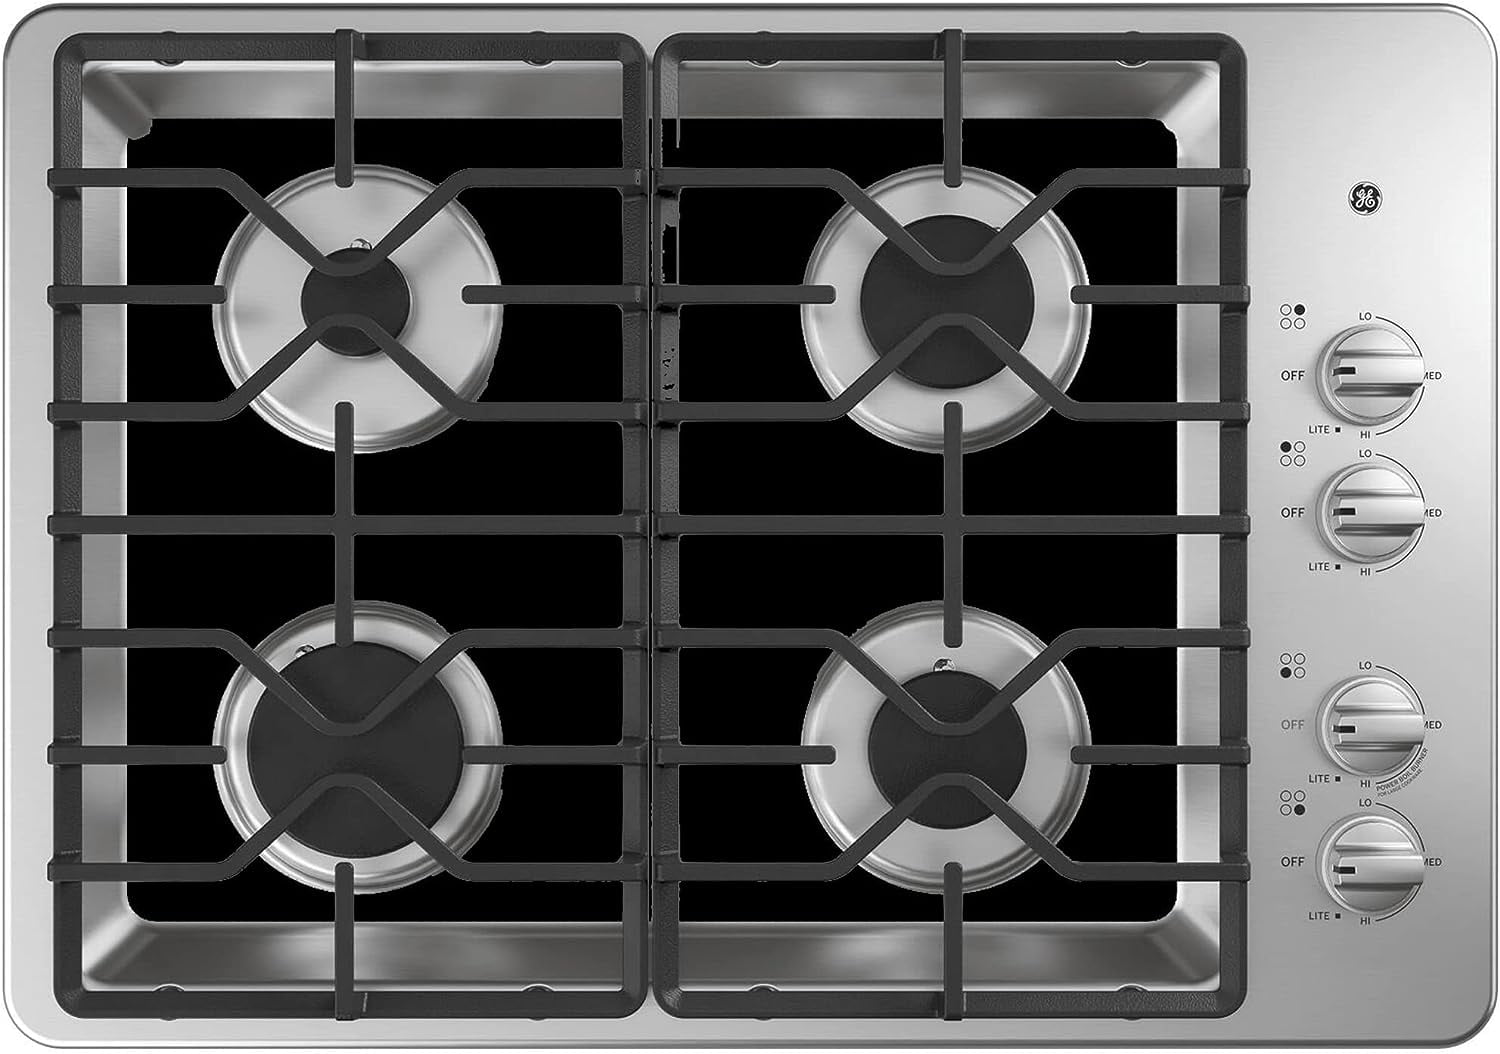 Gas Stove Covers - 8 PCS Gas Range Stove Burner Protectors - Double  Thickness & Heat Resistant Stove Top Covers 10.5-Inch - FREE Eyeglass Pouch